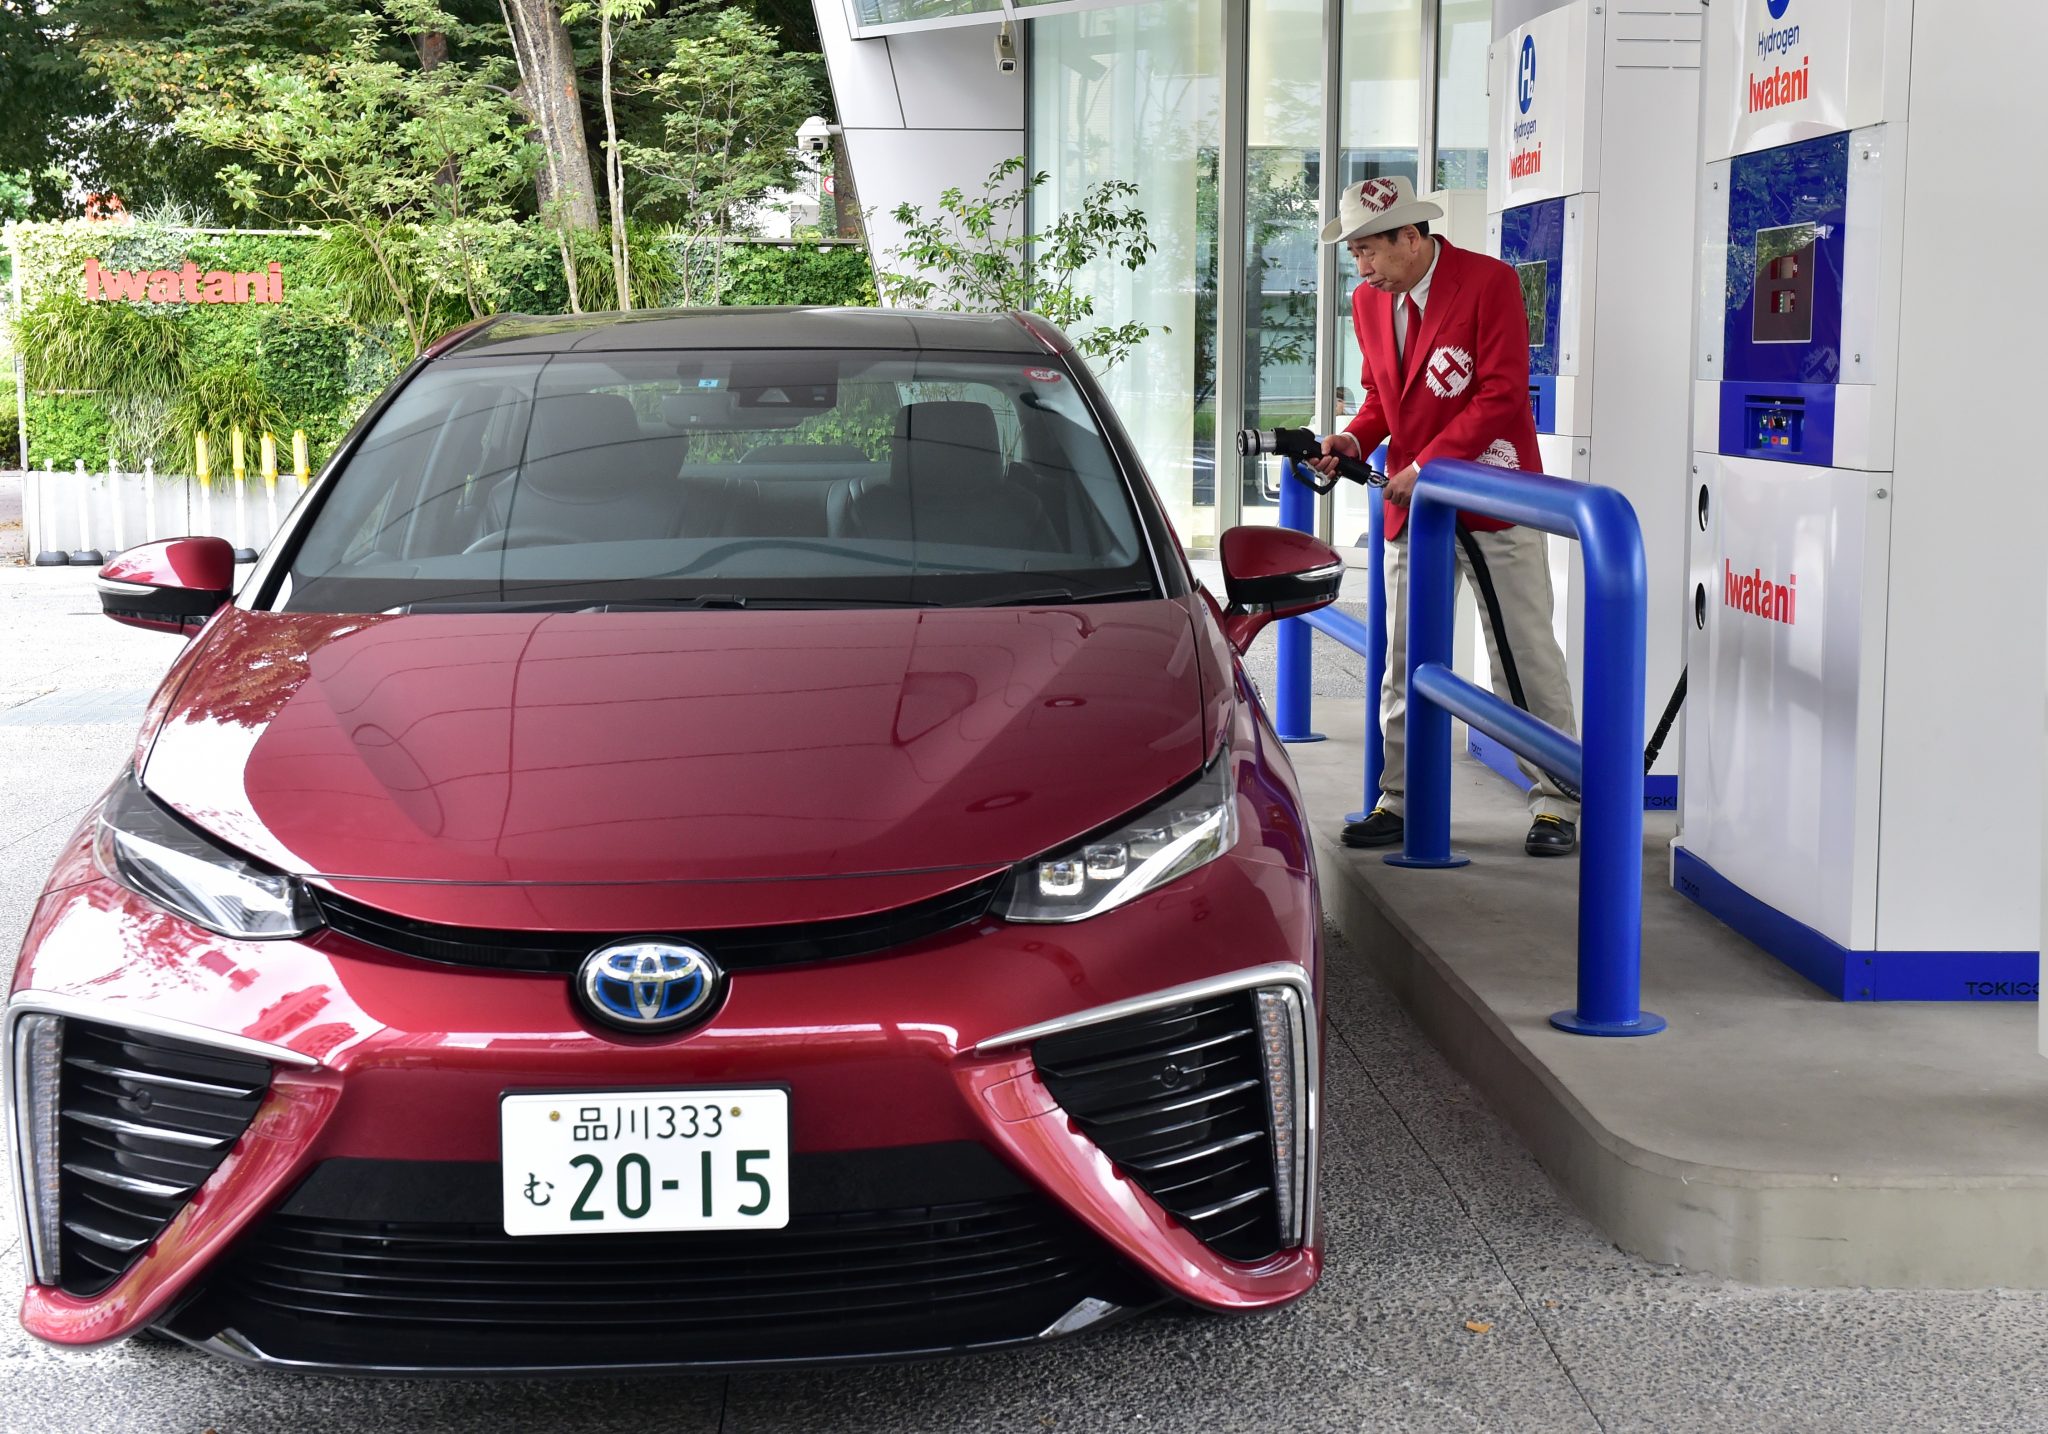 (FILES) This file photo taken on October 29, 2015 shows Japan's gas distributor Iwatani's serviceman charging hydrogen gas to Japanese auto giant Toyota Motor's fuel cell vehicle Mirai at Iwatani hydrogen station in Tokyo. Toyota said on February 15, 2017 it is recalling almost all the roughly 3,000 Mirai fuel-cell vehicles it has sold globally due a software glitch that can shut off its hydrogen-powered system. / AFP PHOTO / YOSHIKAZU TSUNO